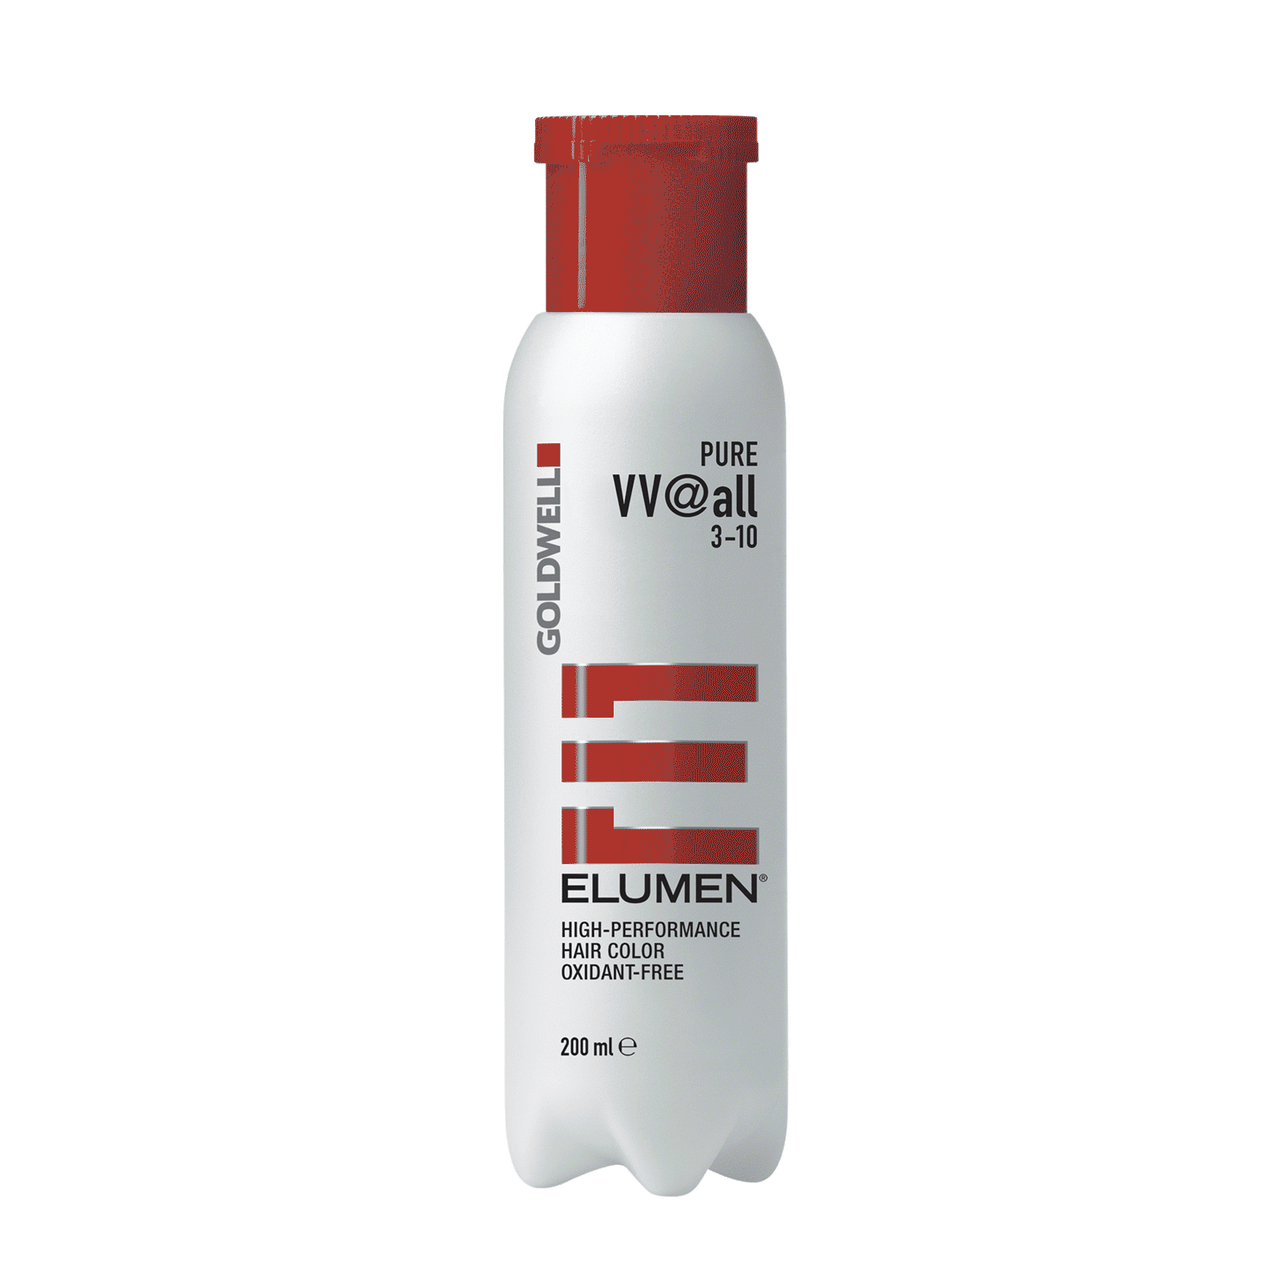 Goldwell  VV@All Pure 